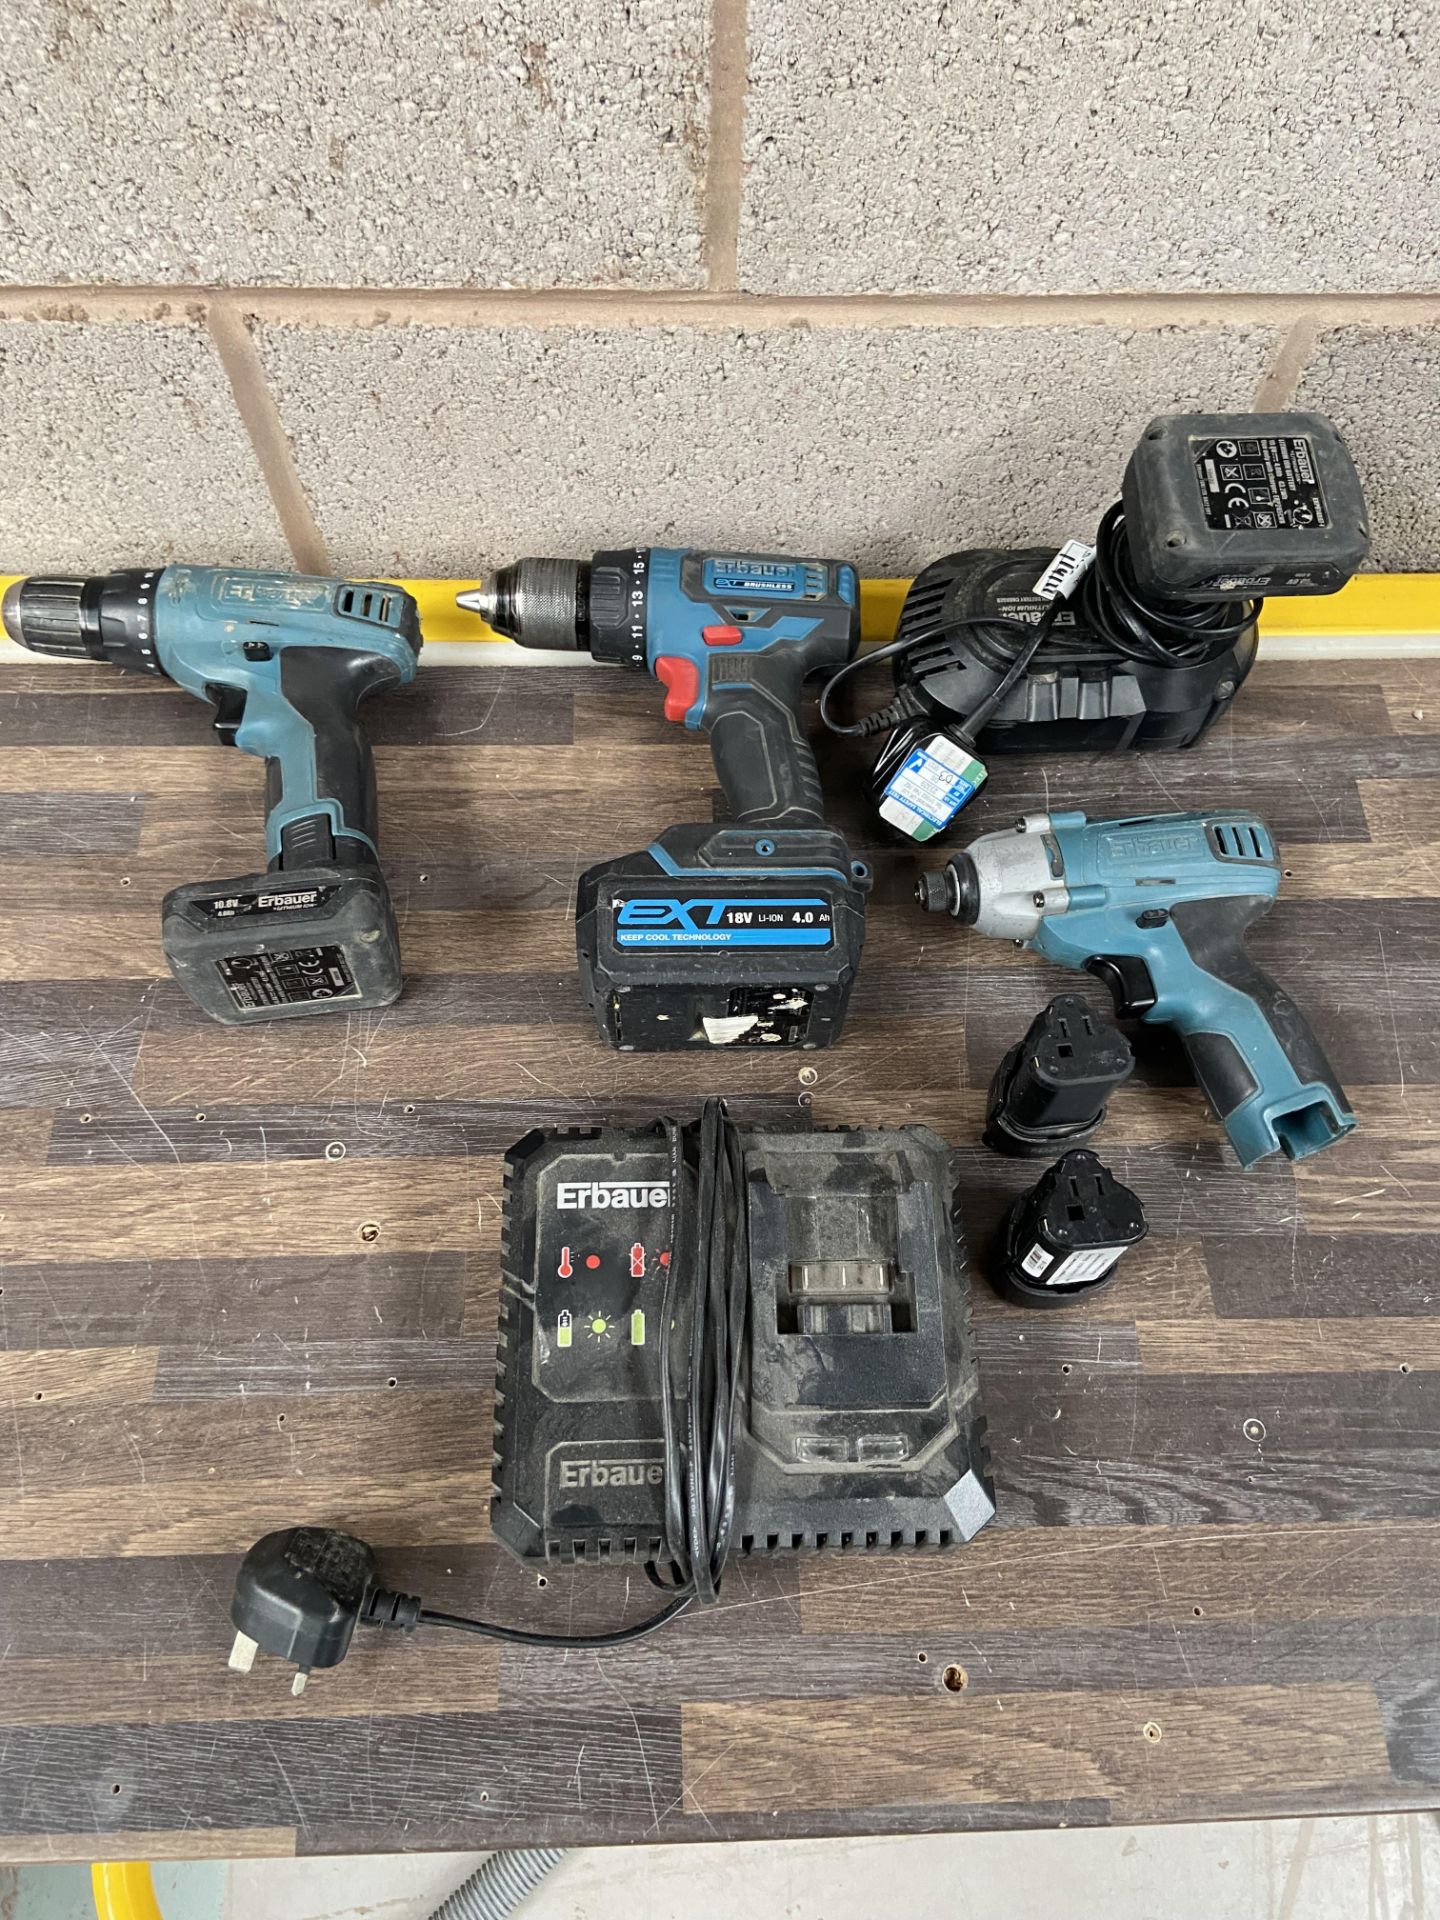 4 x Erbauer power tools, Erbauer drill driver, Erbauer EDD18-Li-2 Drill &2 x Erbauer Impact driver